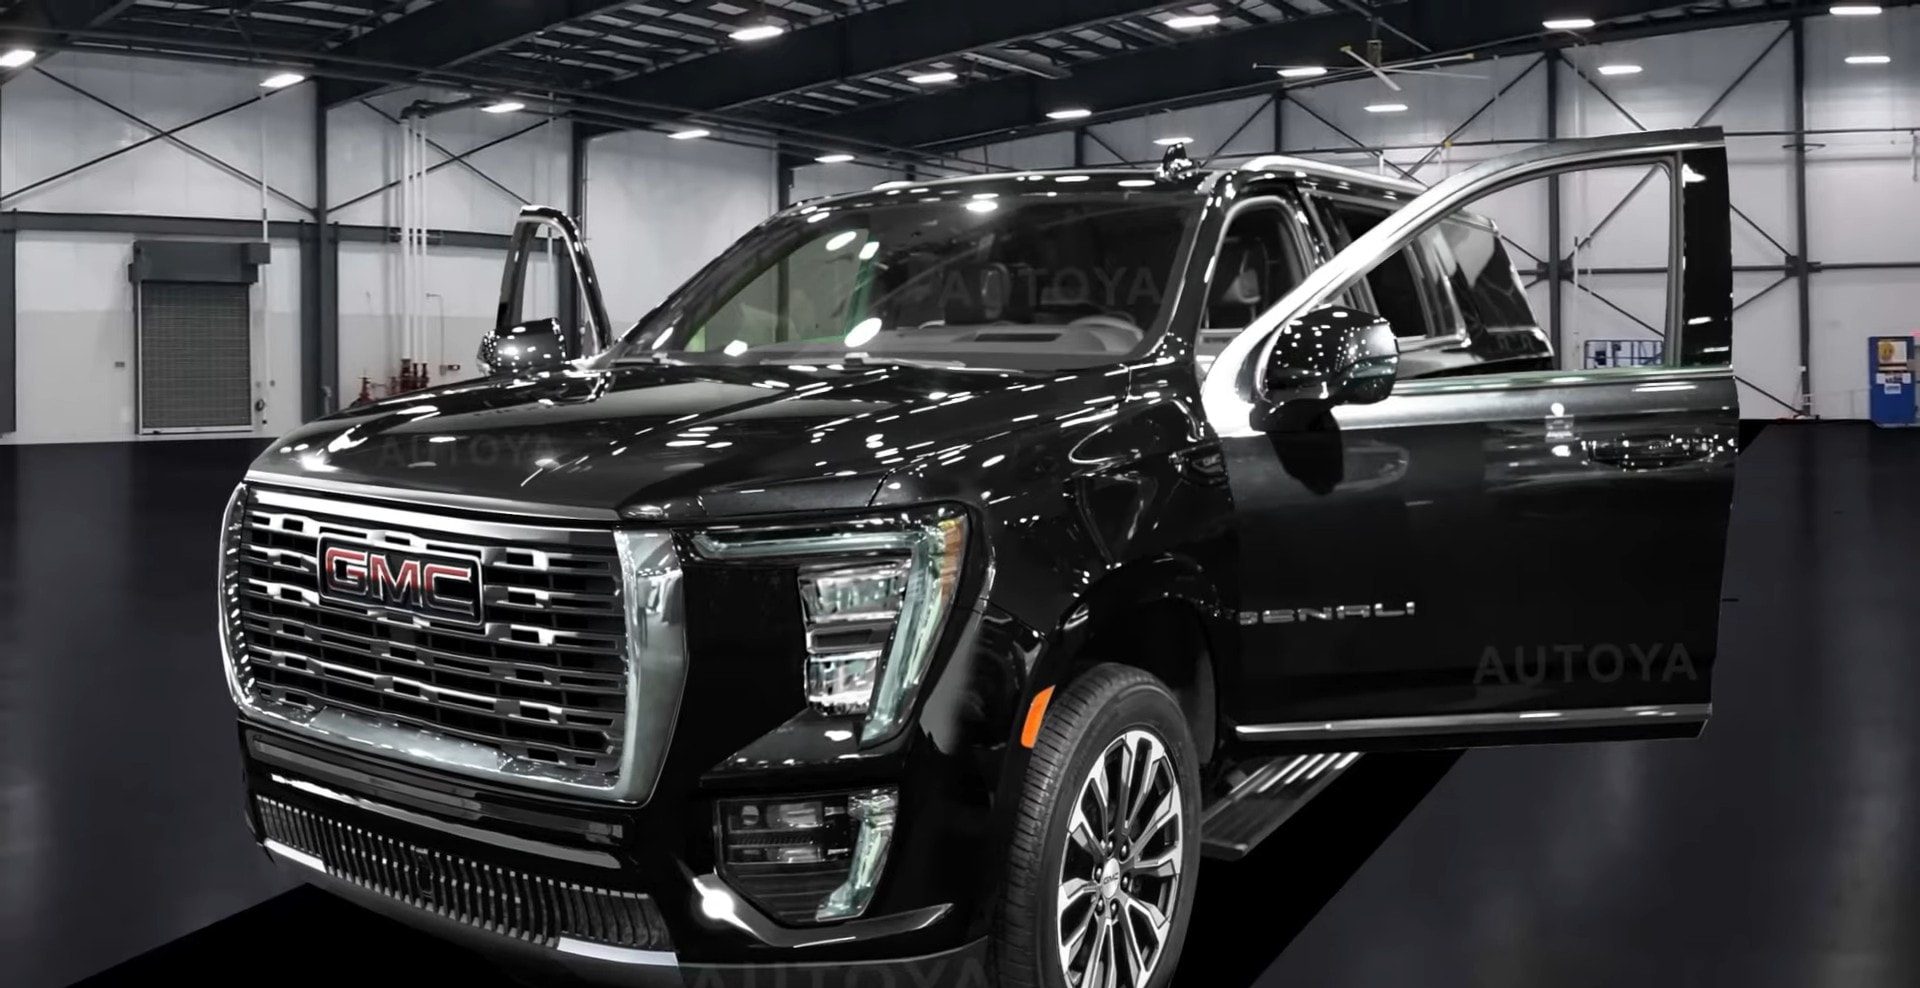 GM's Automotive Dominance Innovations in Trucks and SUVs